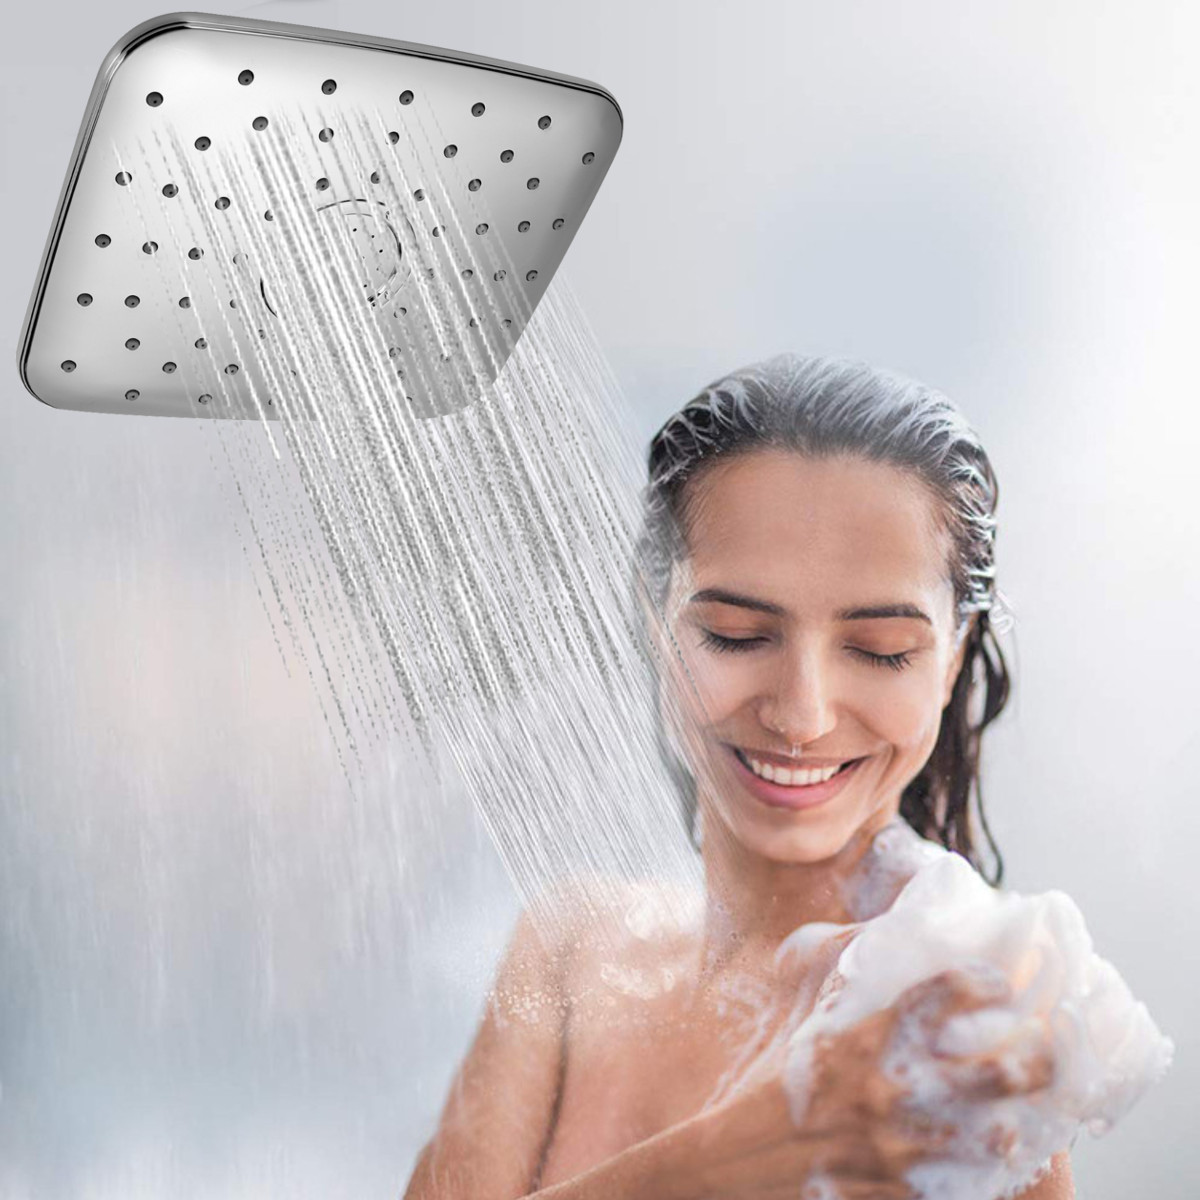 5-in-1-Rainfall-Handheld-Shower-Head-Combo-3-Level-Adjustable-Dual-Square-Hose-1825049-7